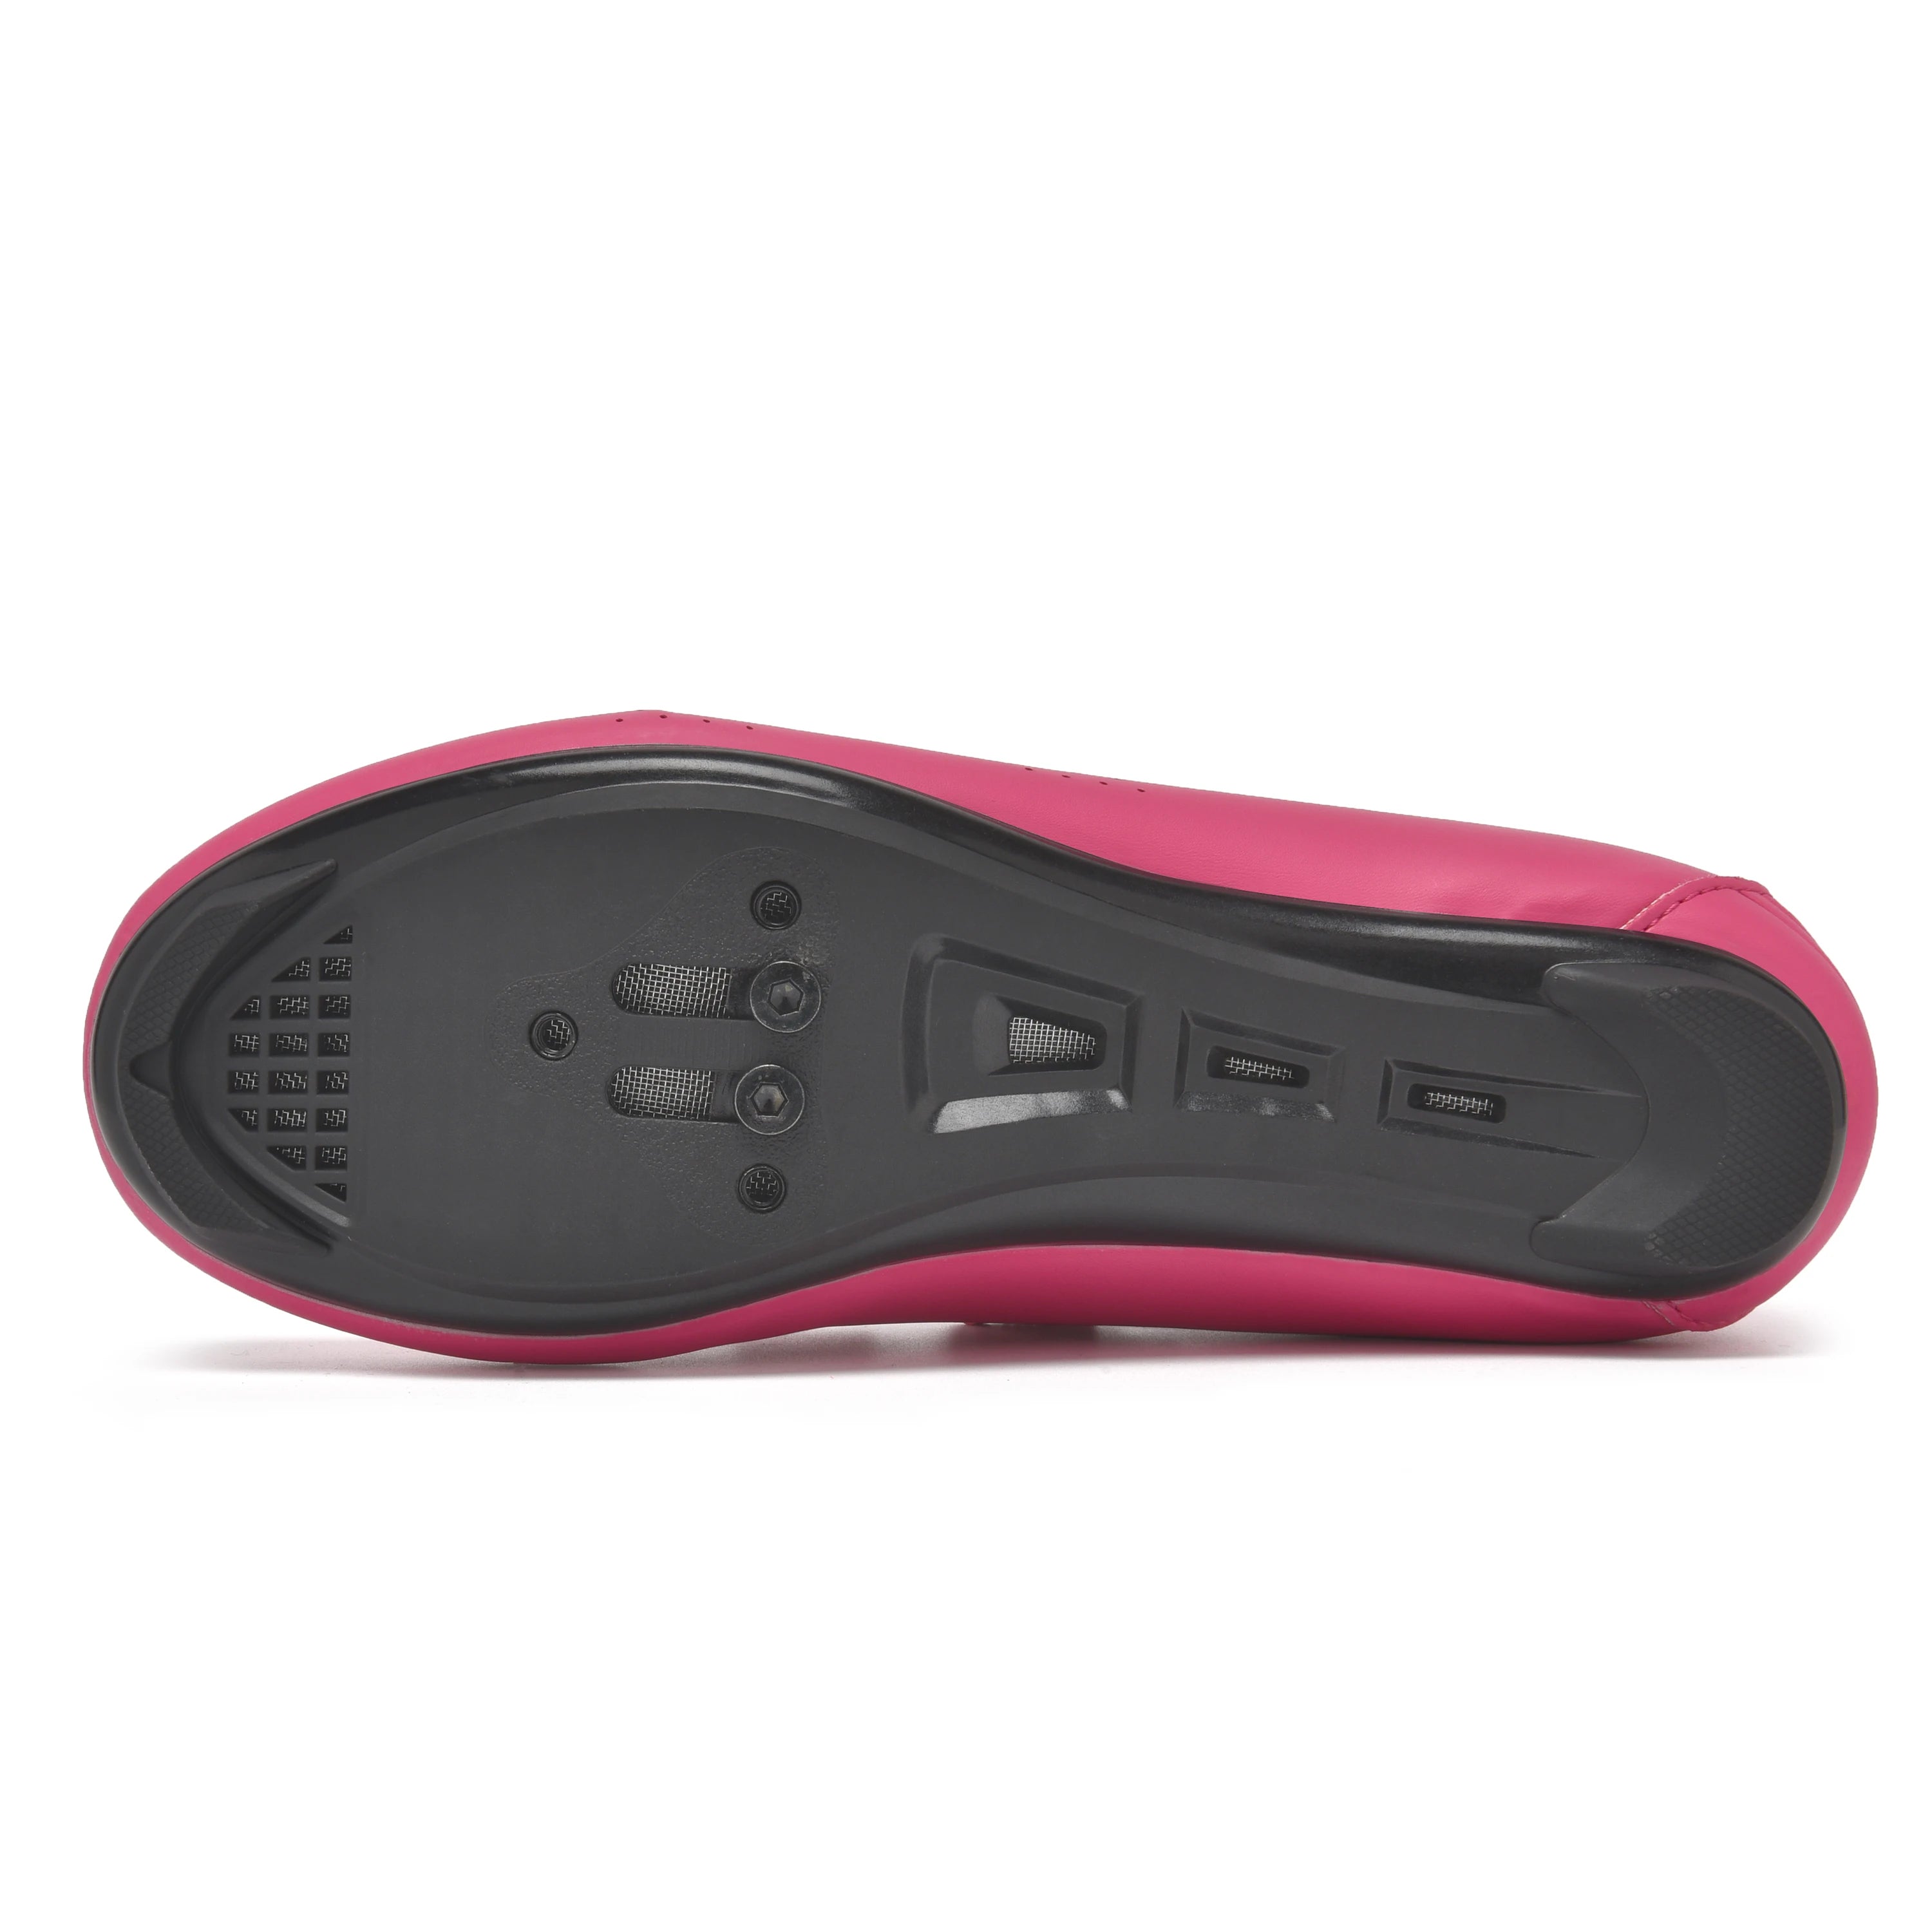 Women Cycling Shoes for Road or Mountain bike- With Cleats,  Cleatless, or flat rubber soles